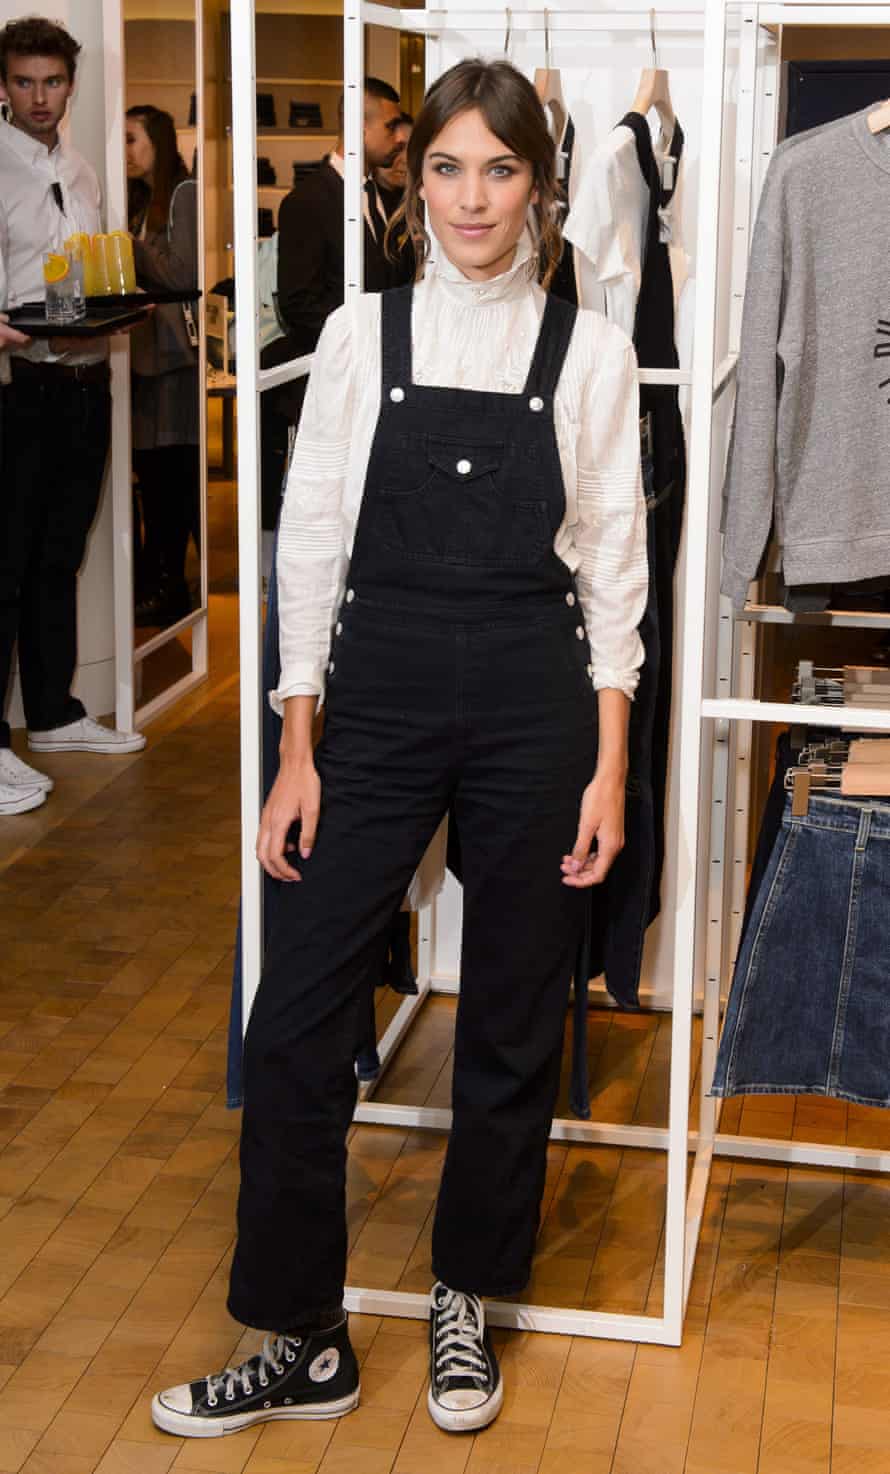 Alexa Chung in dungarees. Of course.